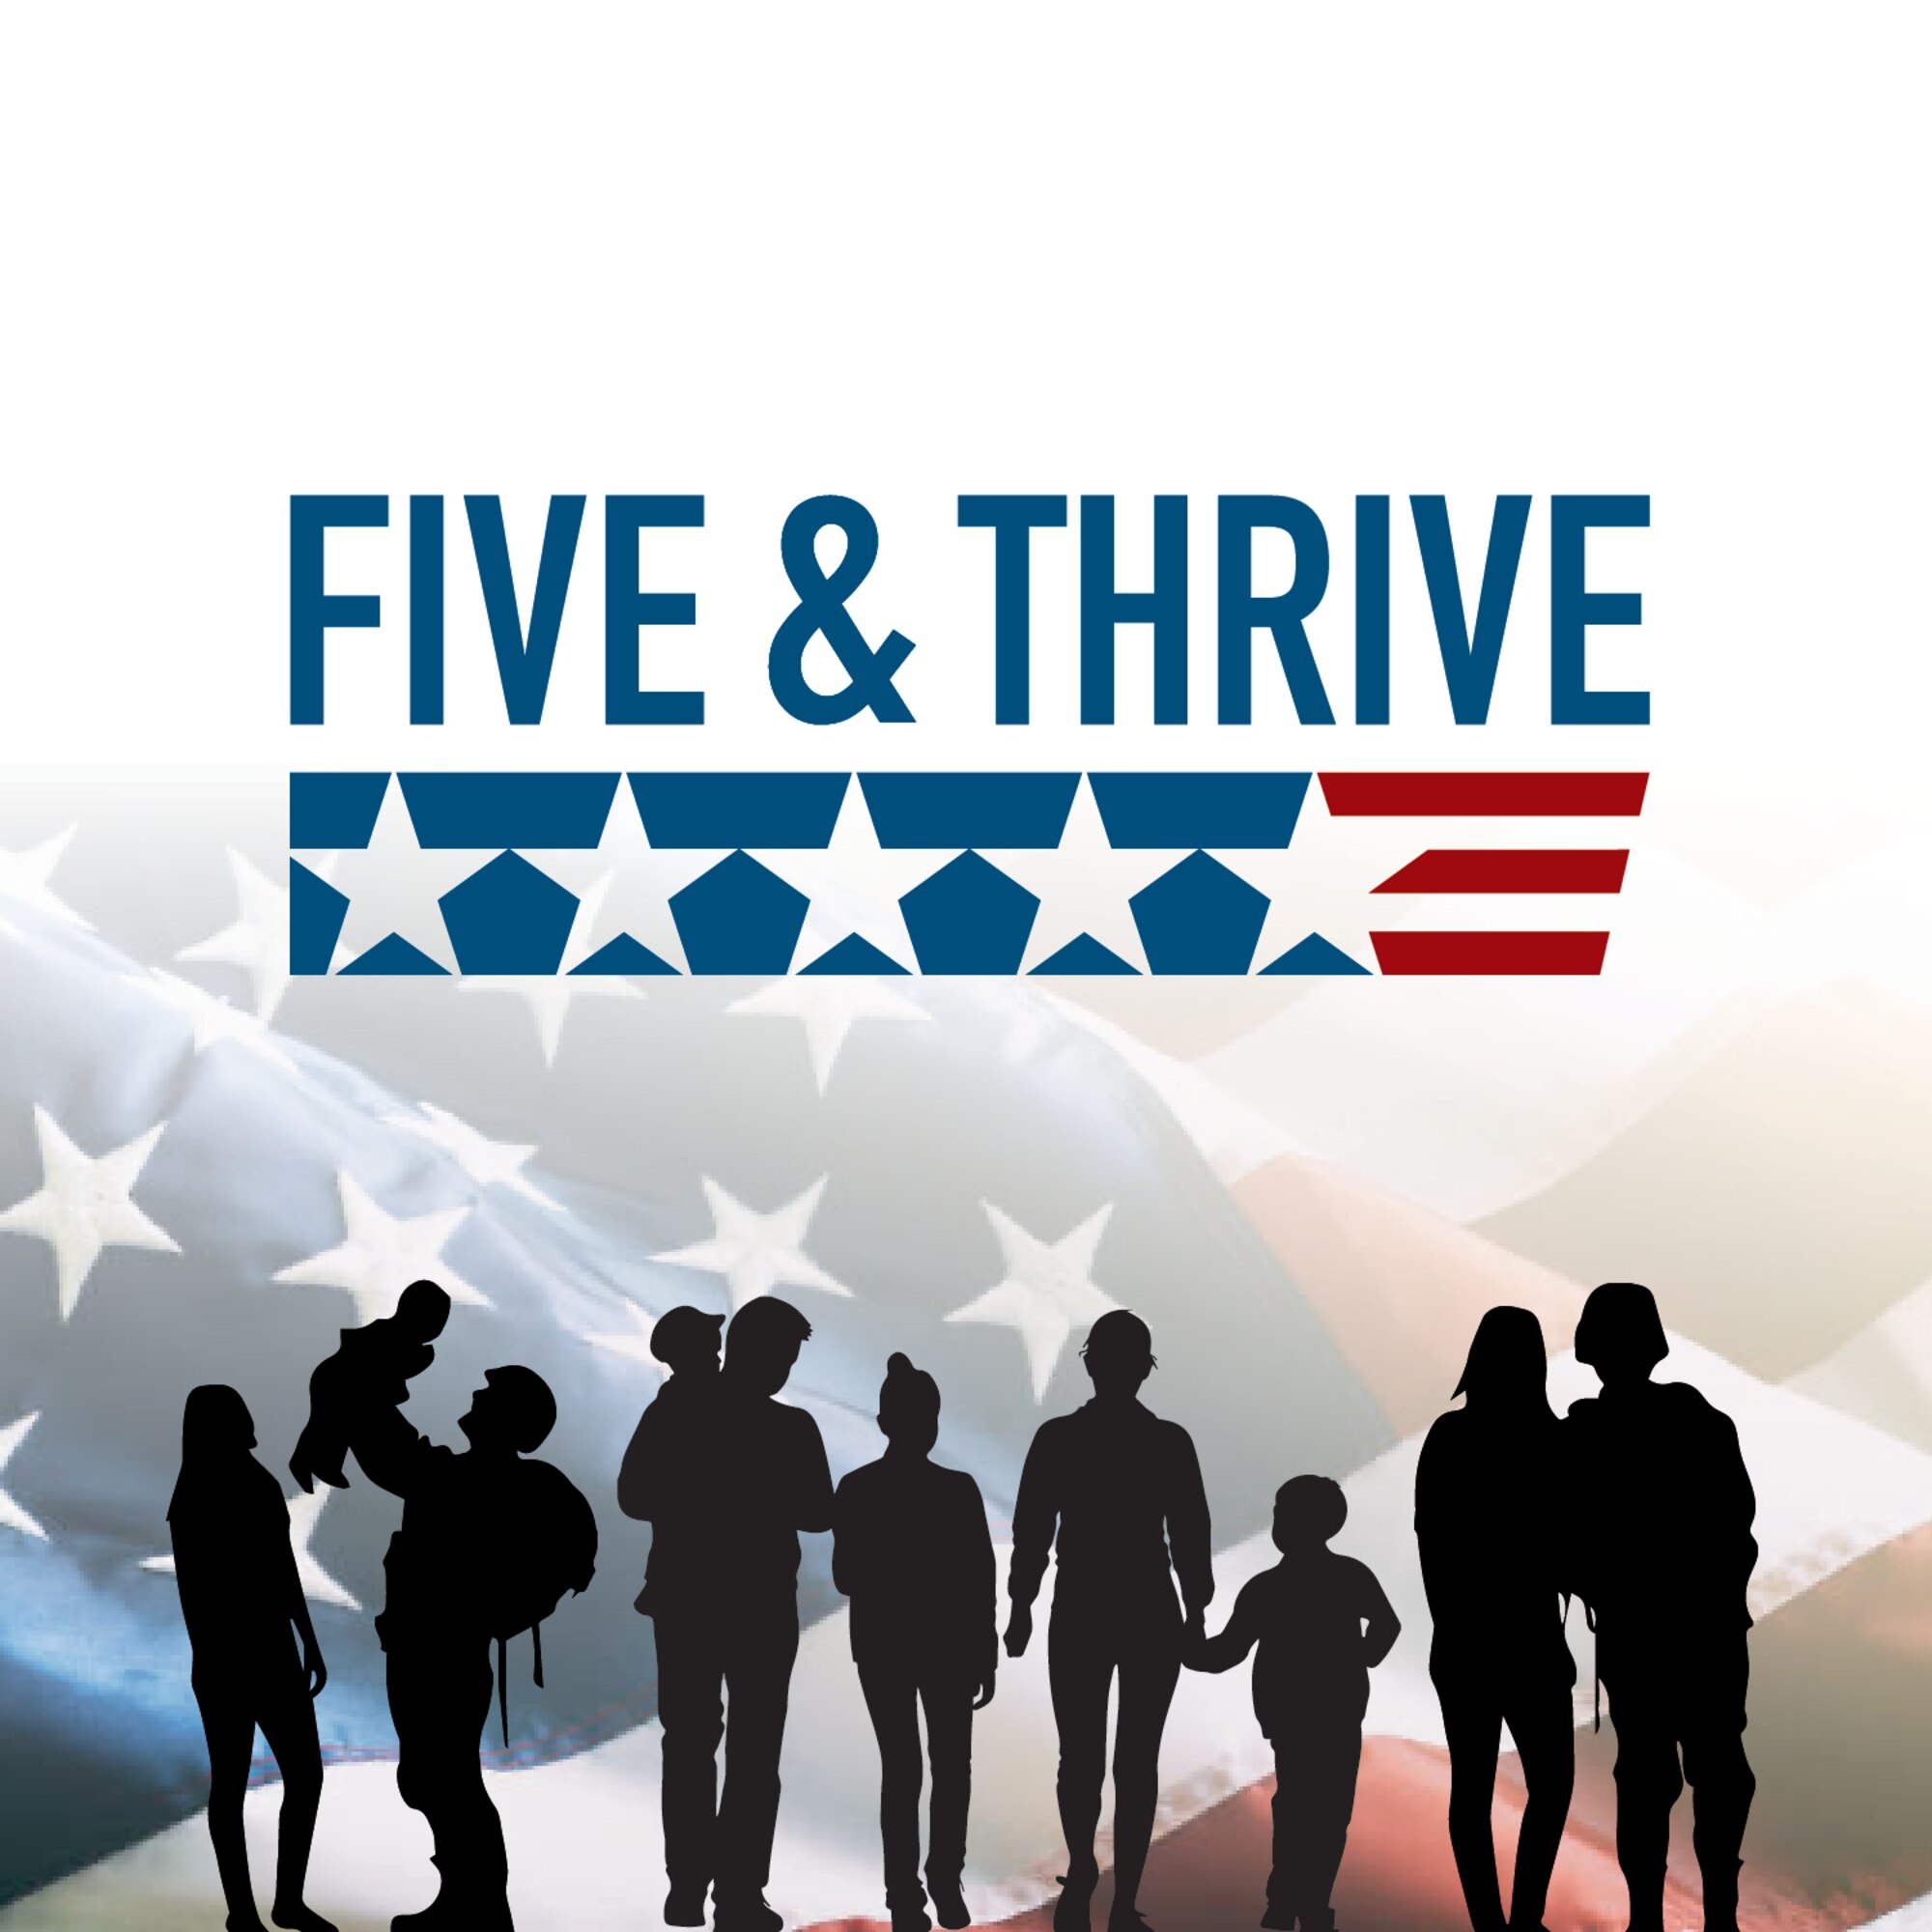 Sharene Brown, spouse of the Chief of Staff of the Air Force, announces the Five & Thrive initiative, Dec. 17, 2021. The new initiative focuses on the top five life challenges faced by military families. (U.S. Air Force graphic)